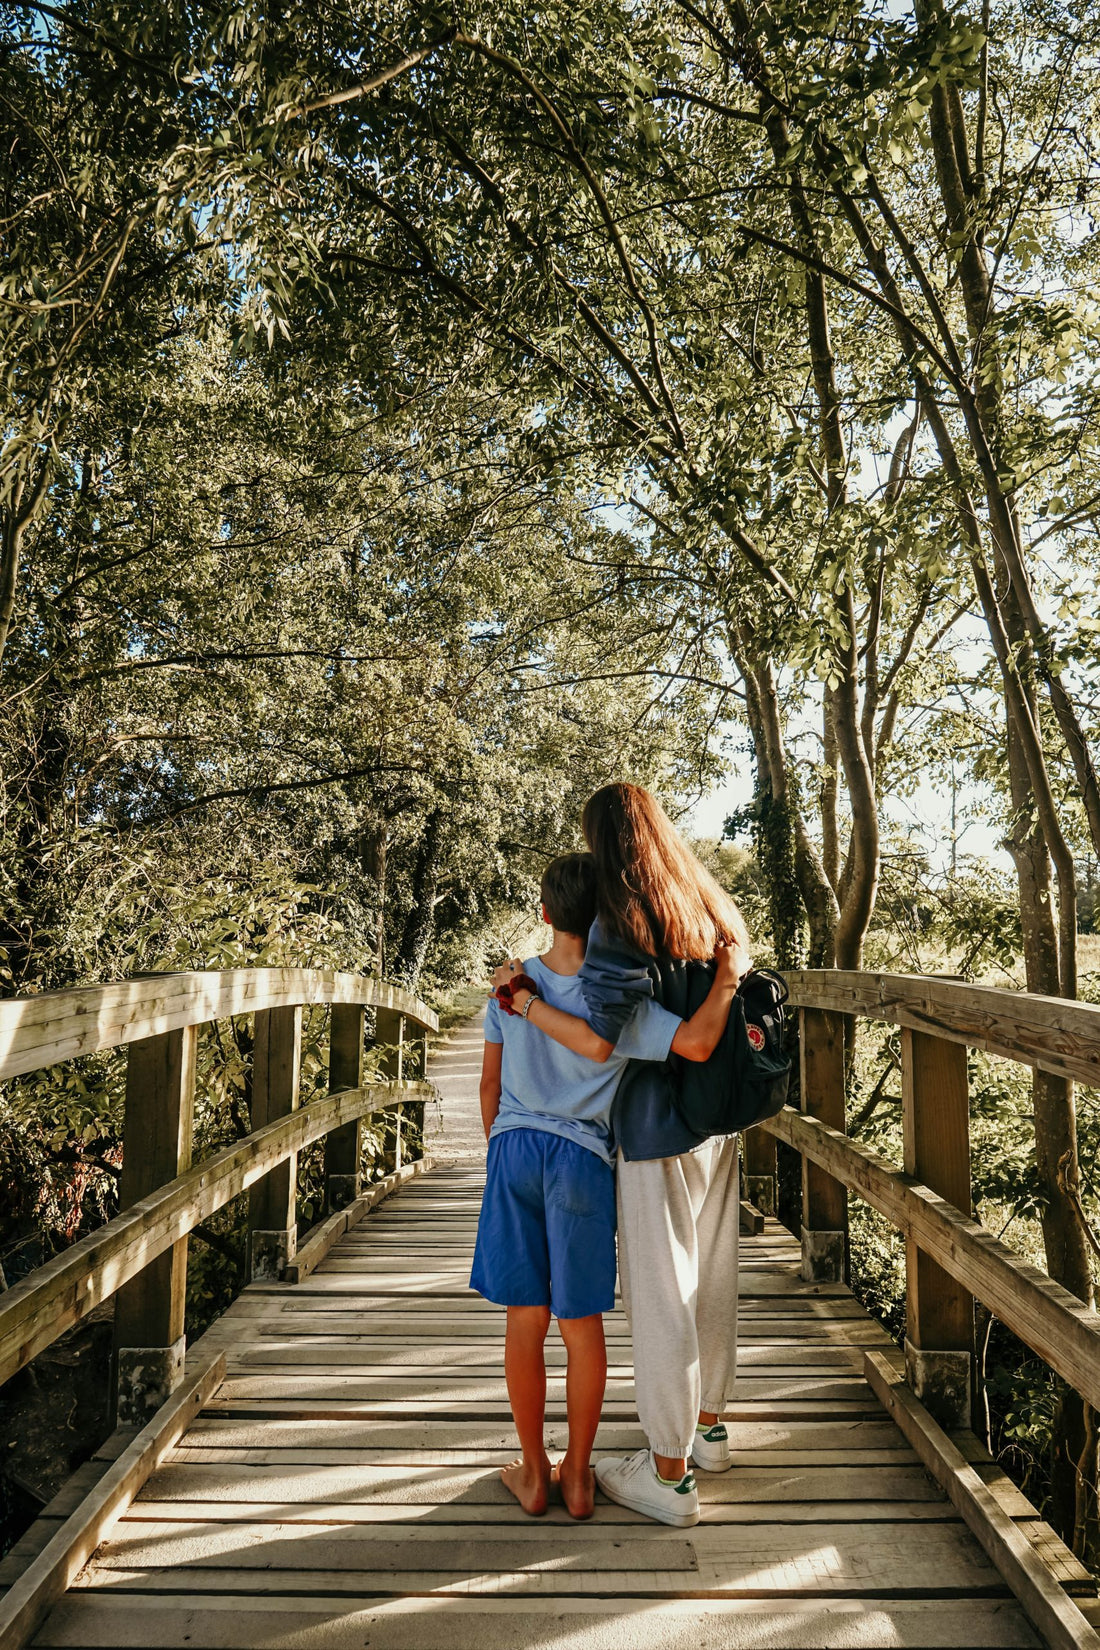 Sister and brother hugging on a boardwalk.